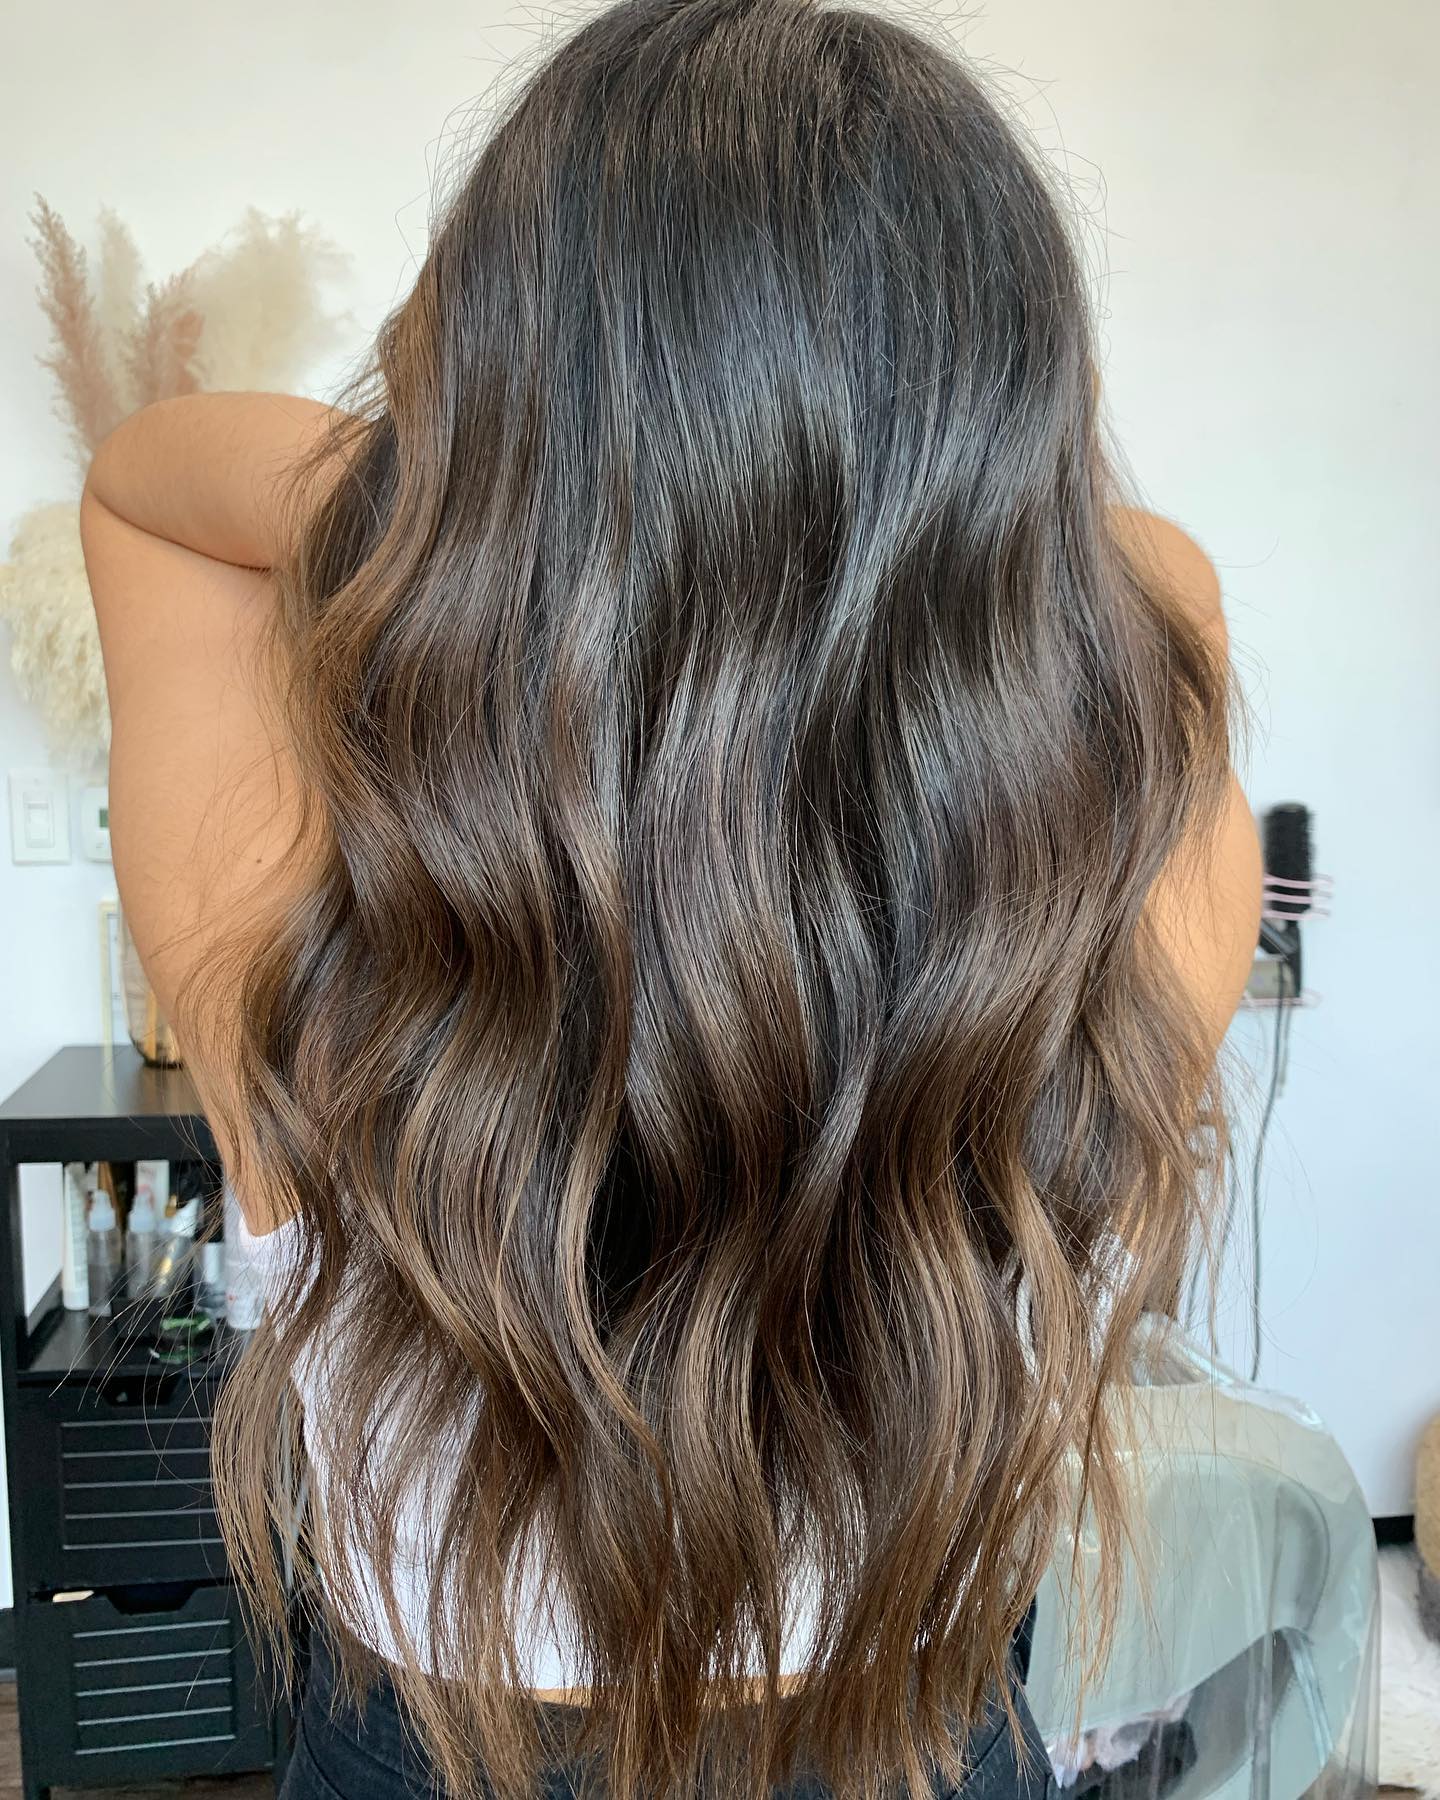 Latte Dark Brown Balayage with Money Pieces